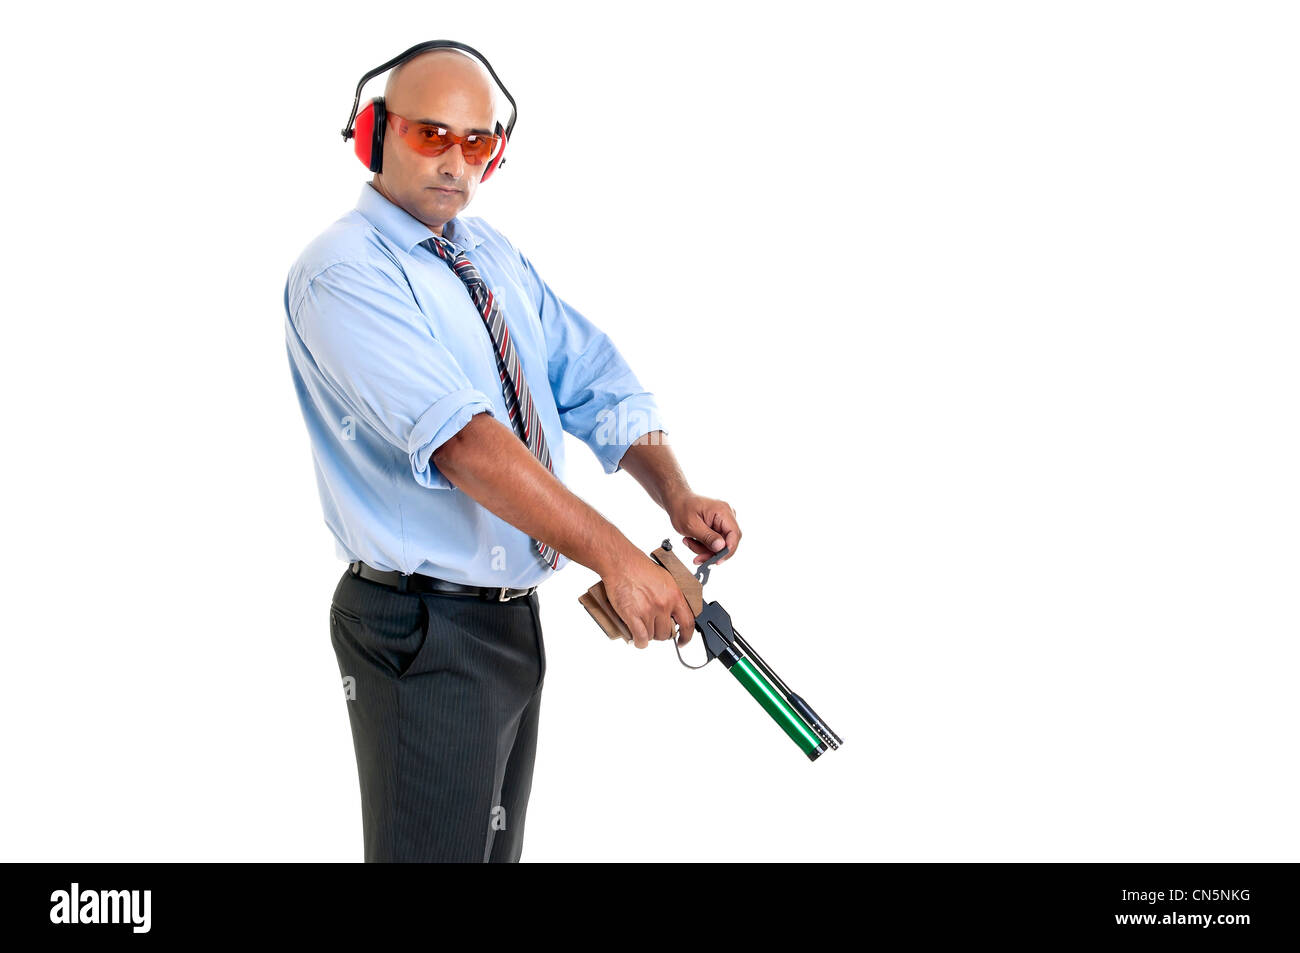 Businessman with compressed air gun Stock Photo